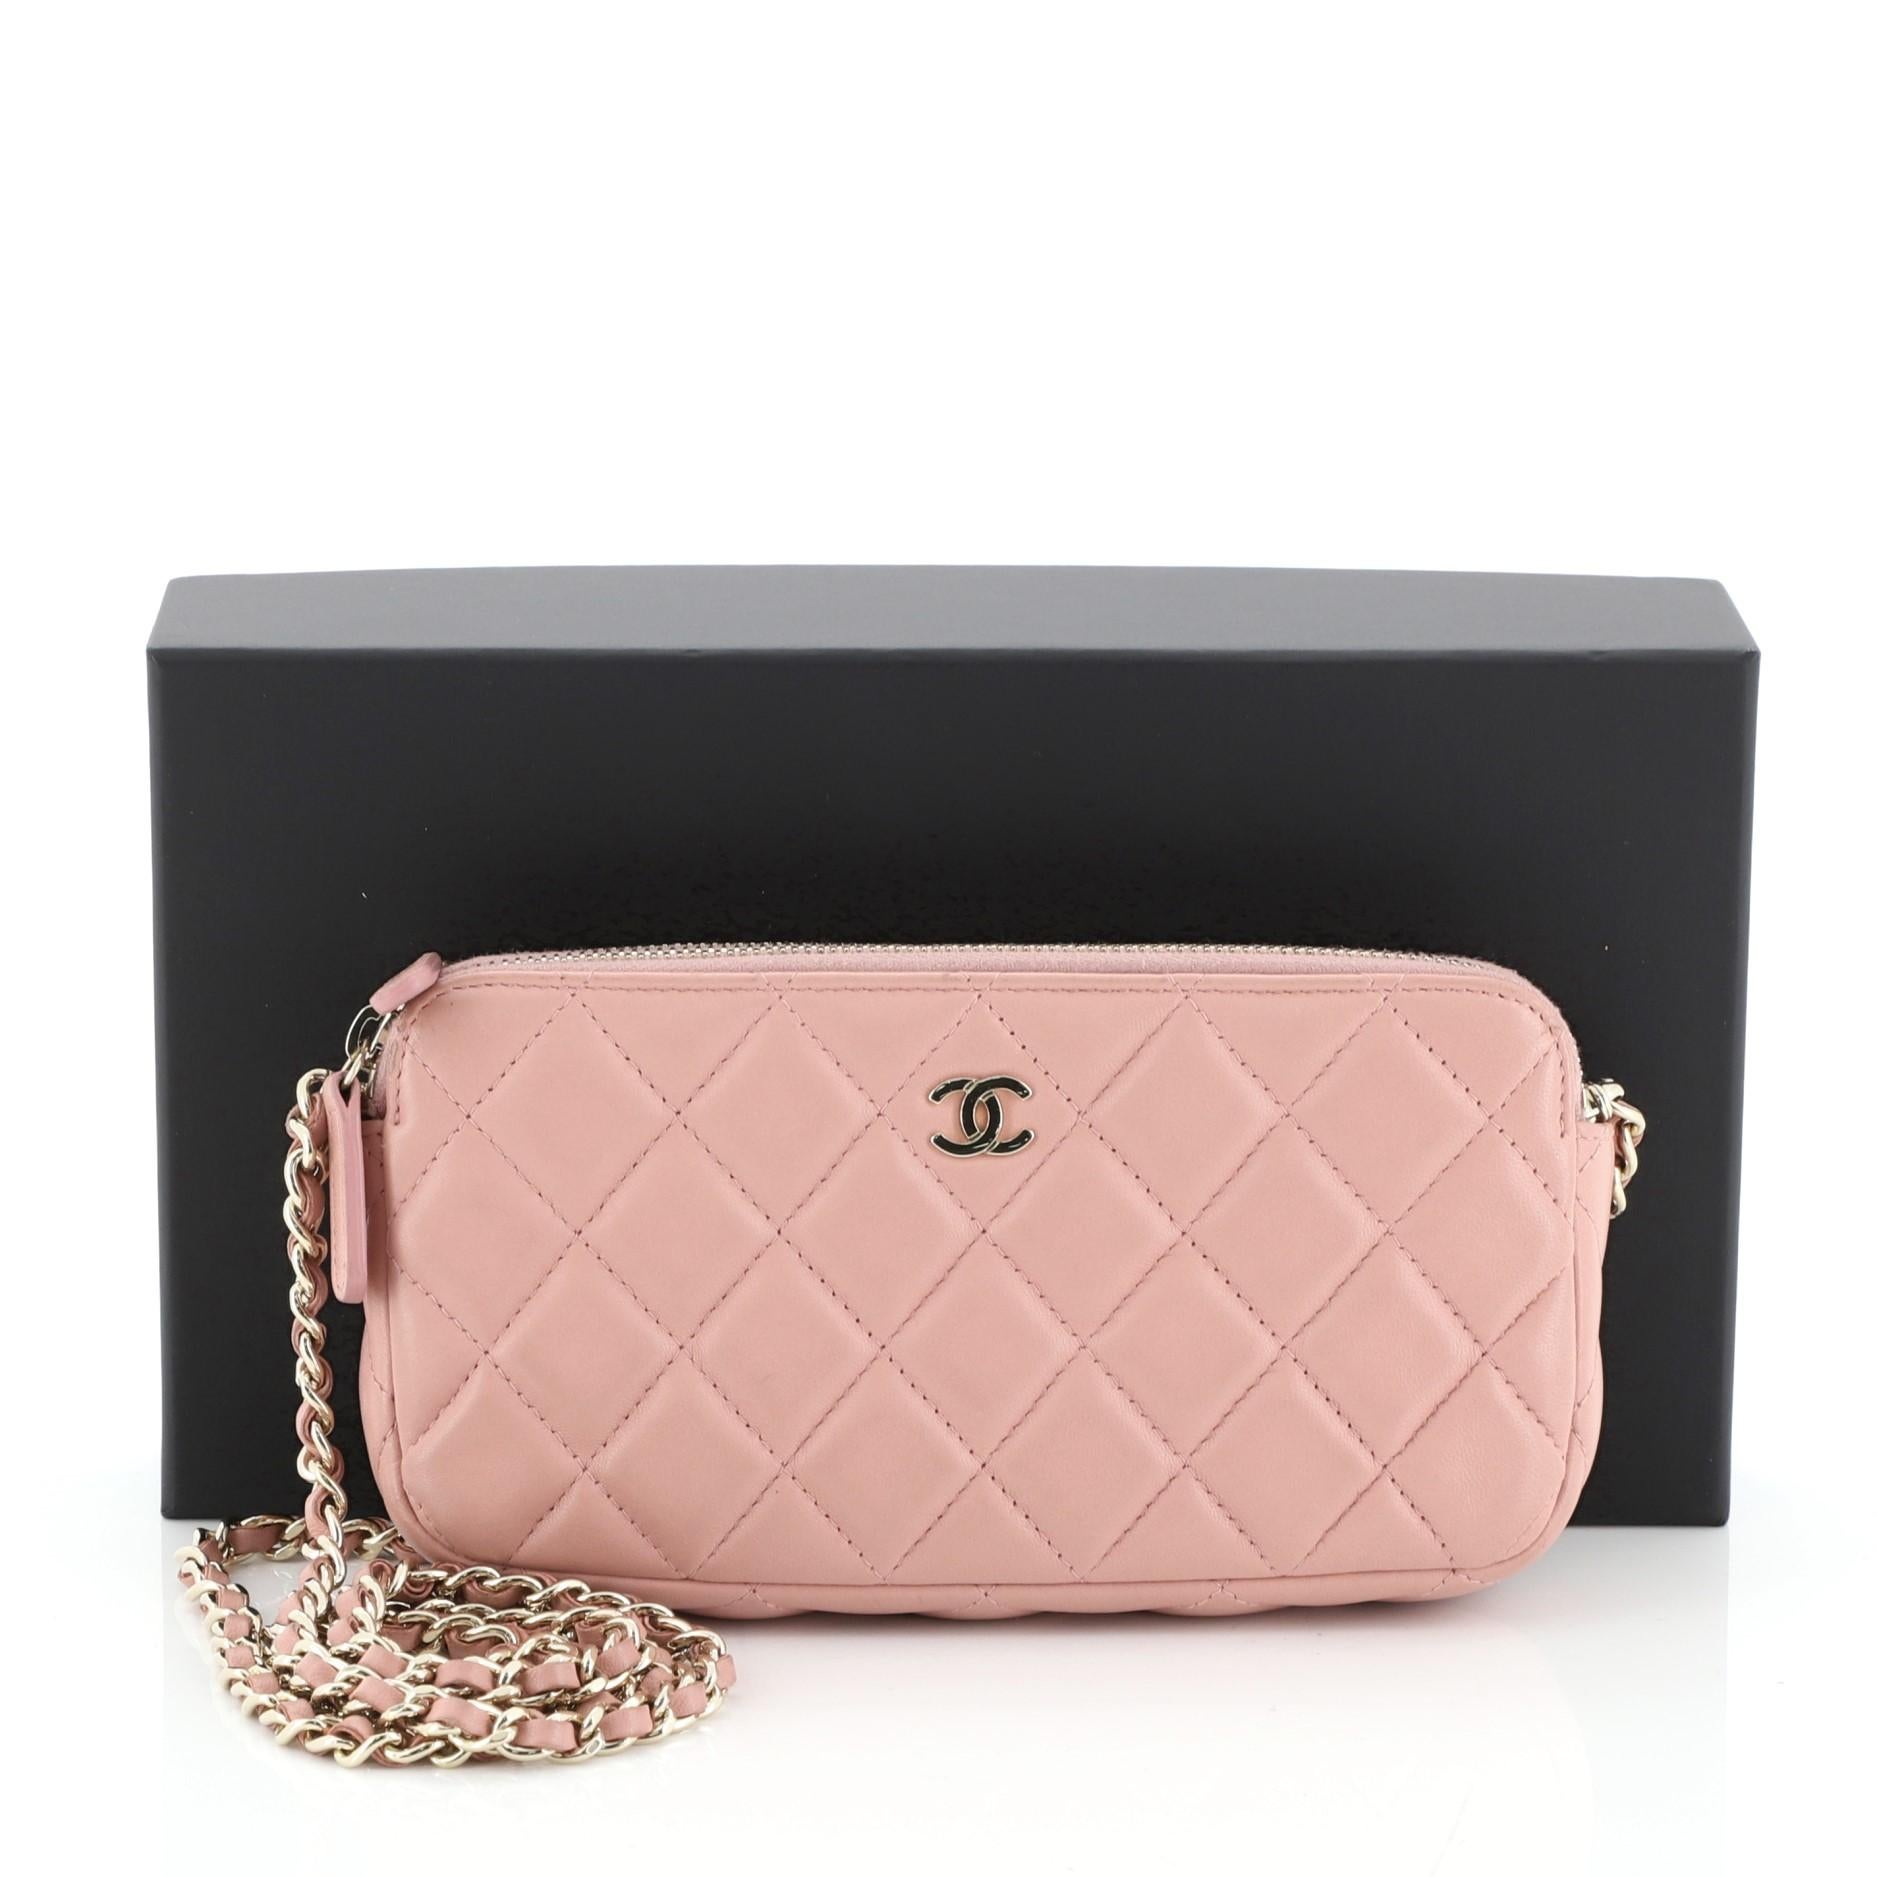 This Chanel Double Zip Clutch with Chain Quilted Caviar, crafted in pink quilted caviar leather, features a detachable woven-in leather chain strap, front CC logo and gold-tone hardware. Its double zip closures and an open center compartment